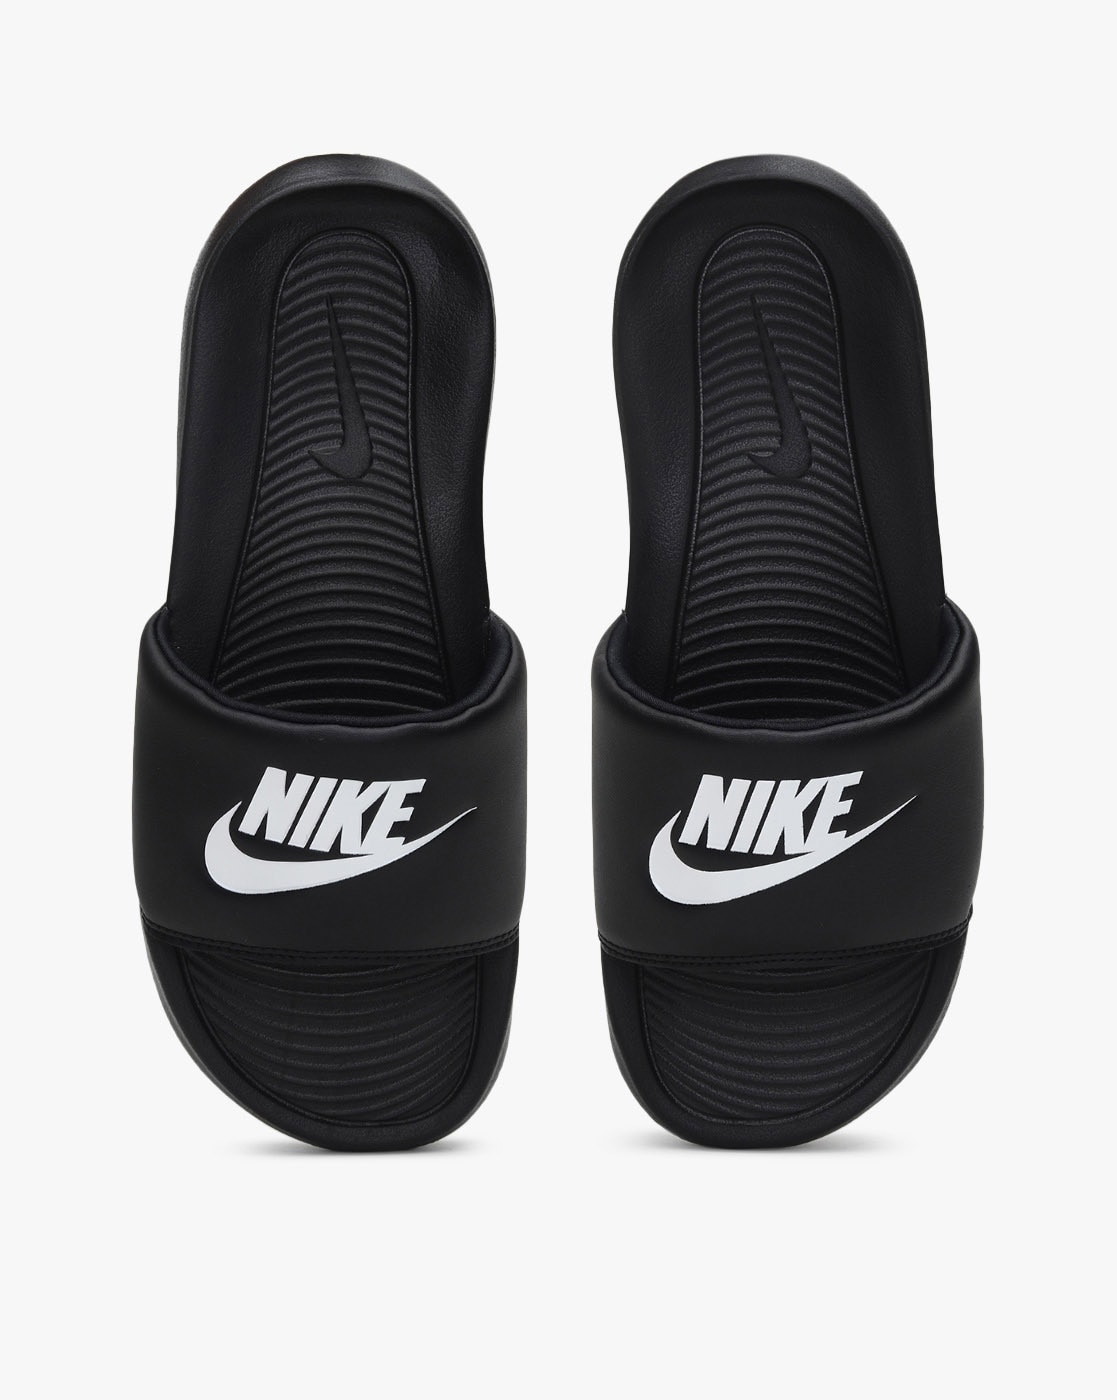 Reveal more than 205 nike slippers for women latest